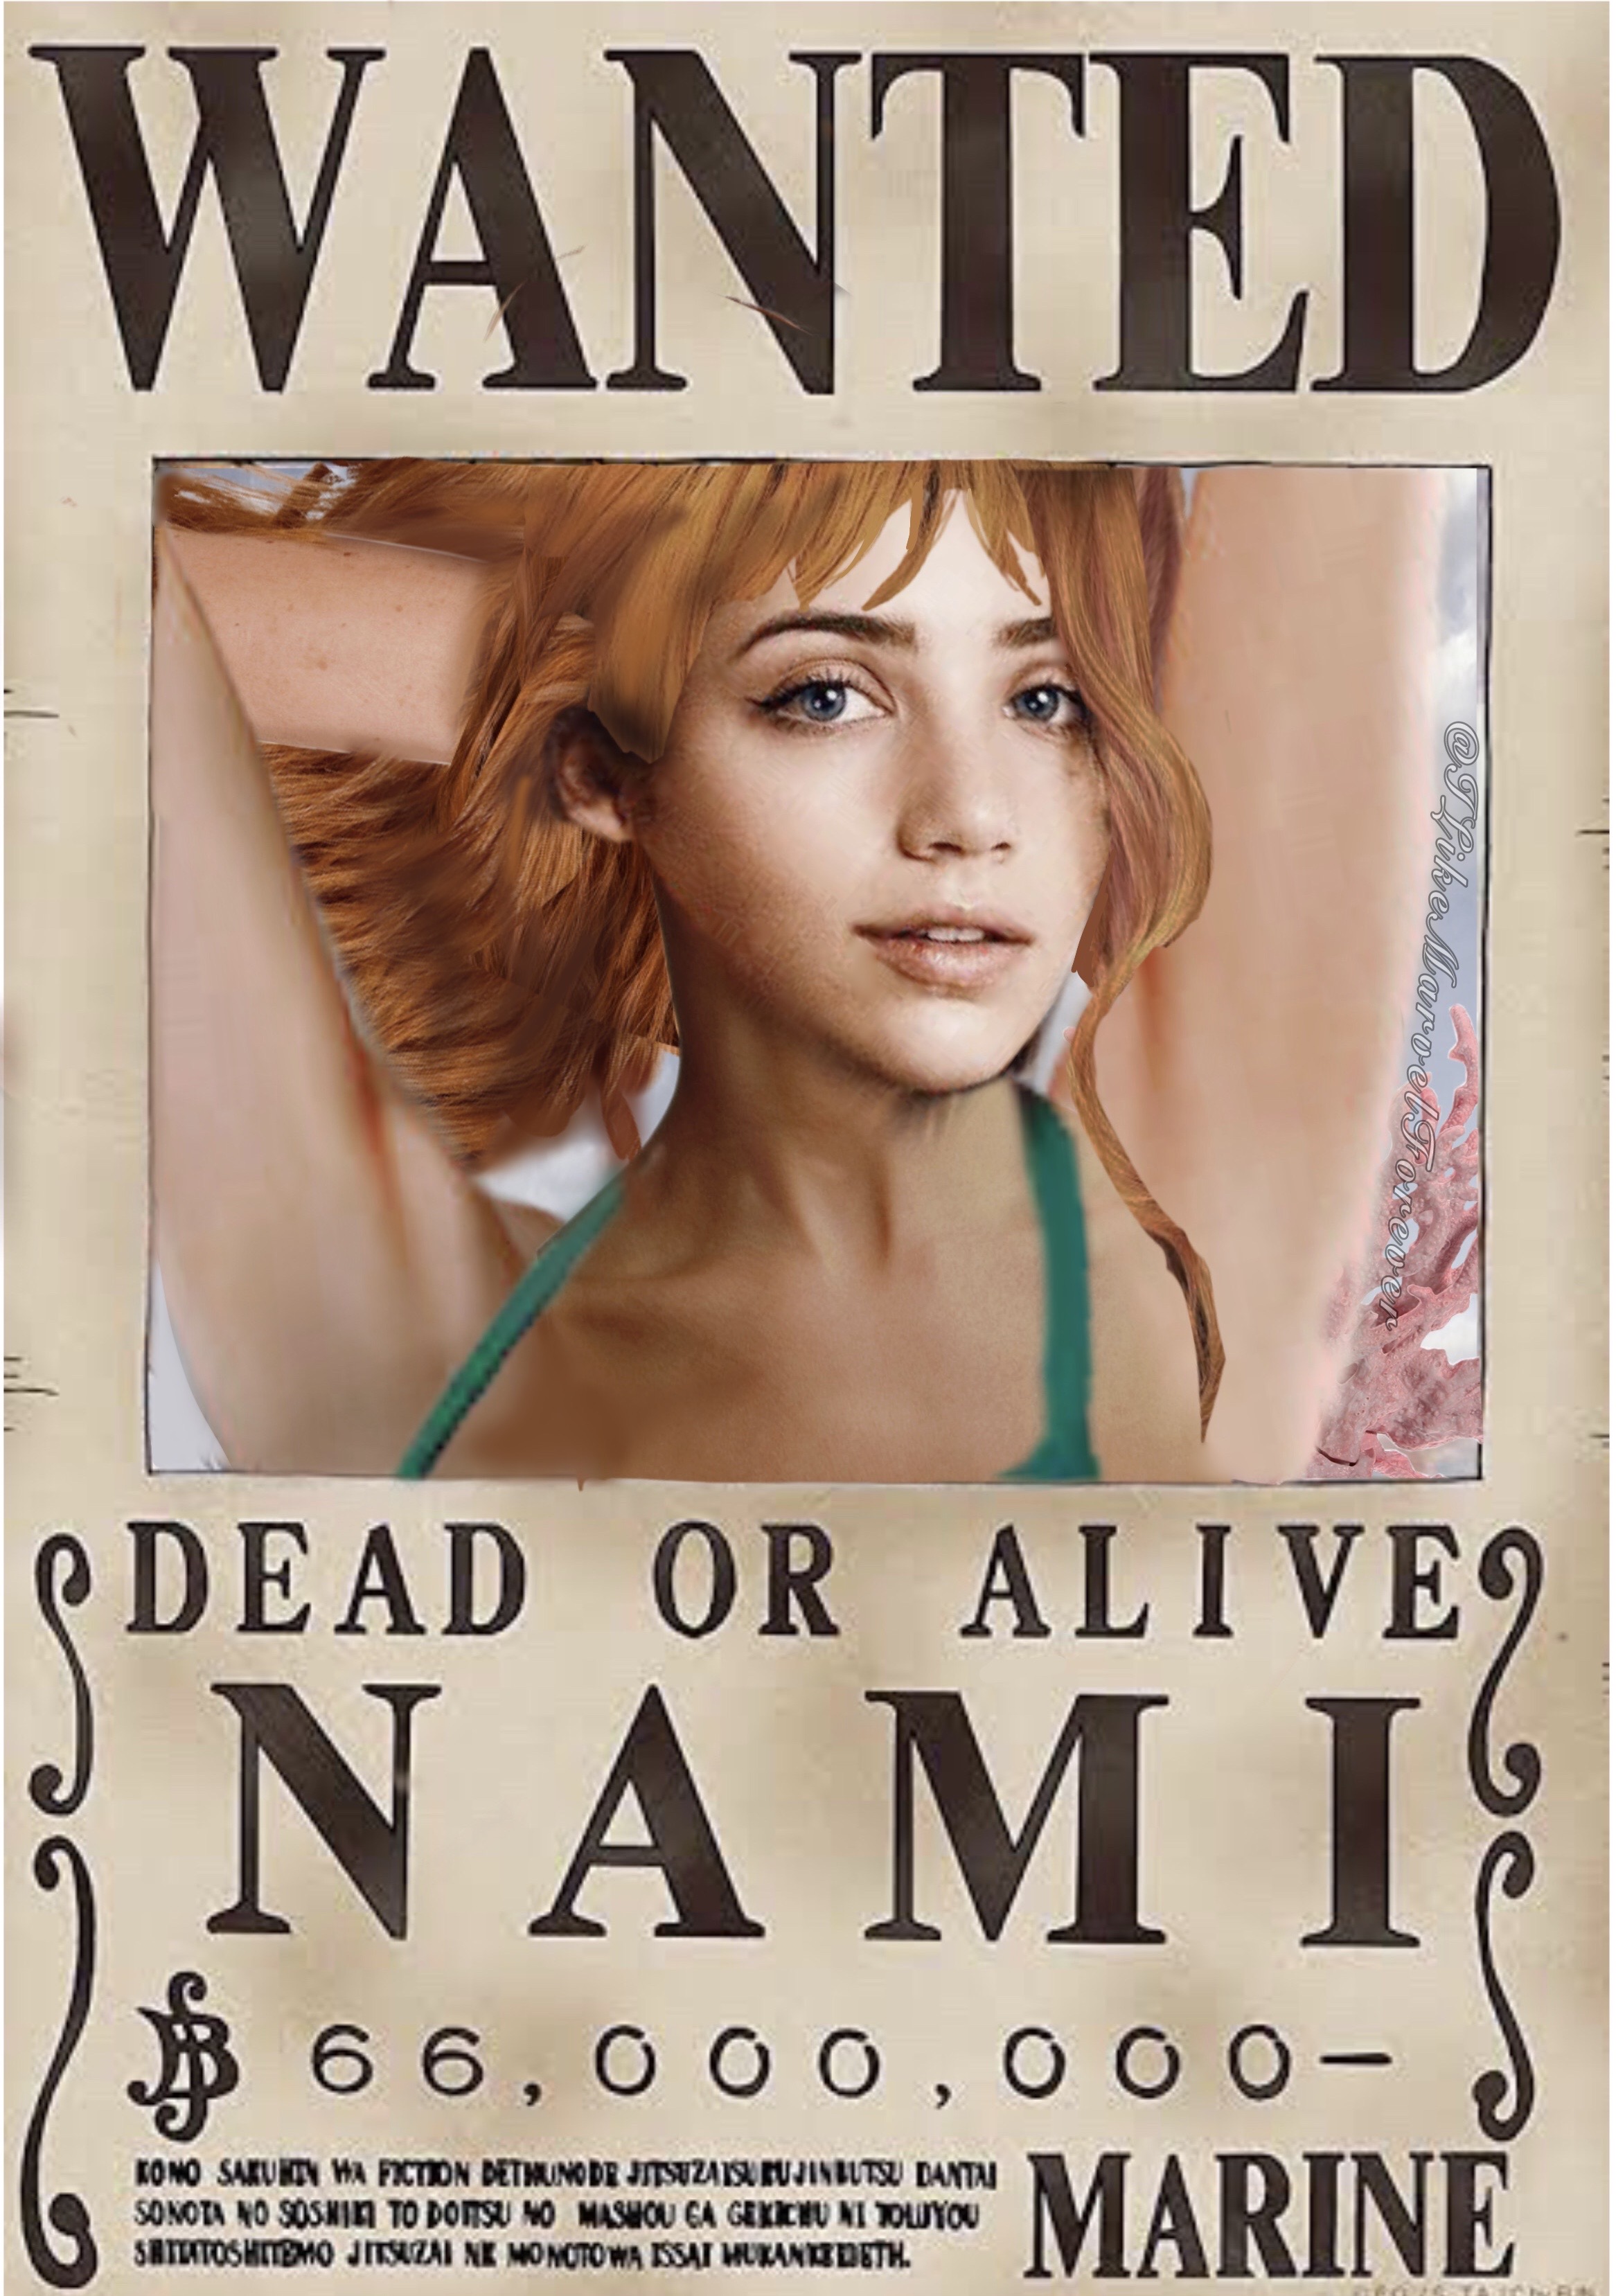 Bounty posters in One Piece live-action